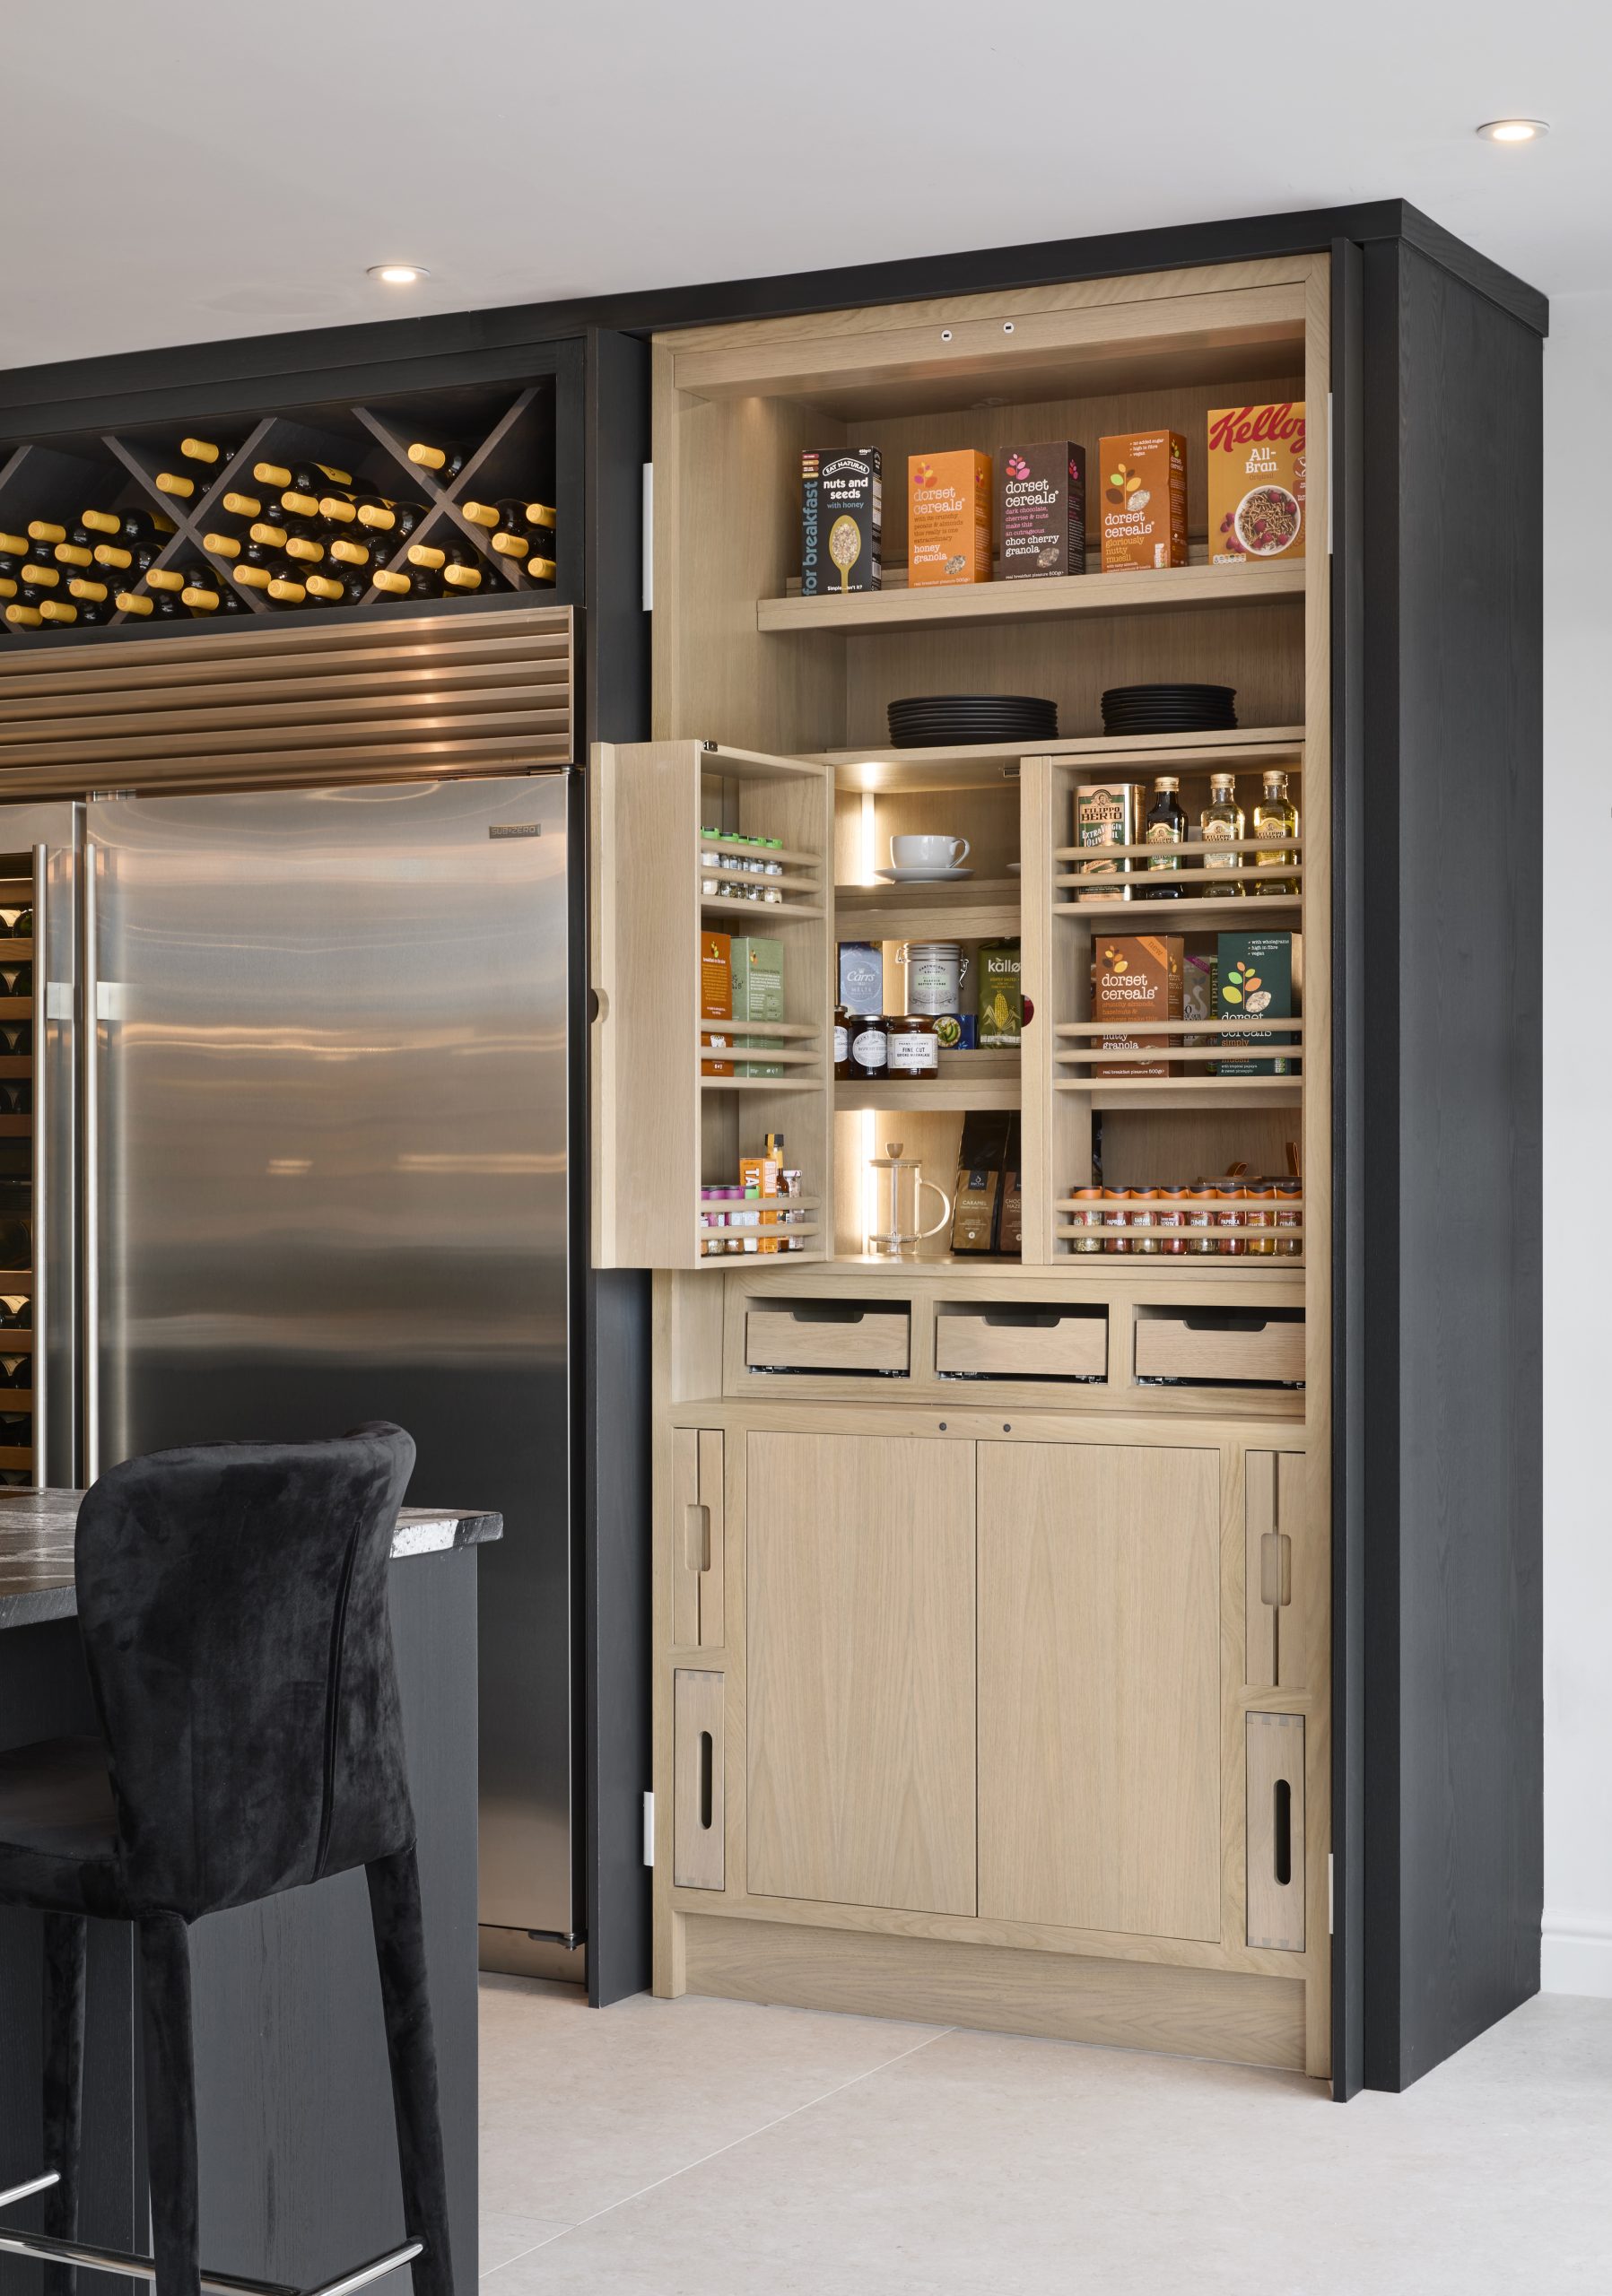 Pocket door pantry in a contemporary dark Charles Yorke kitchen, with oak spice racks, pull our chopping boards and trays. 